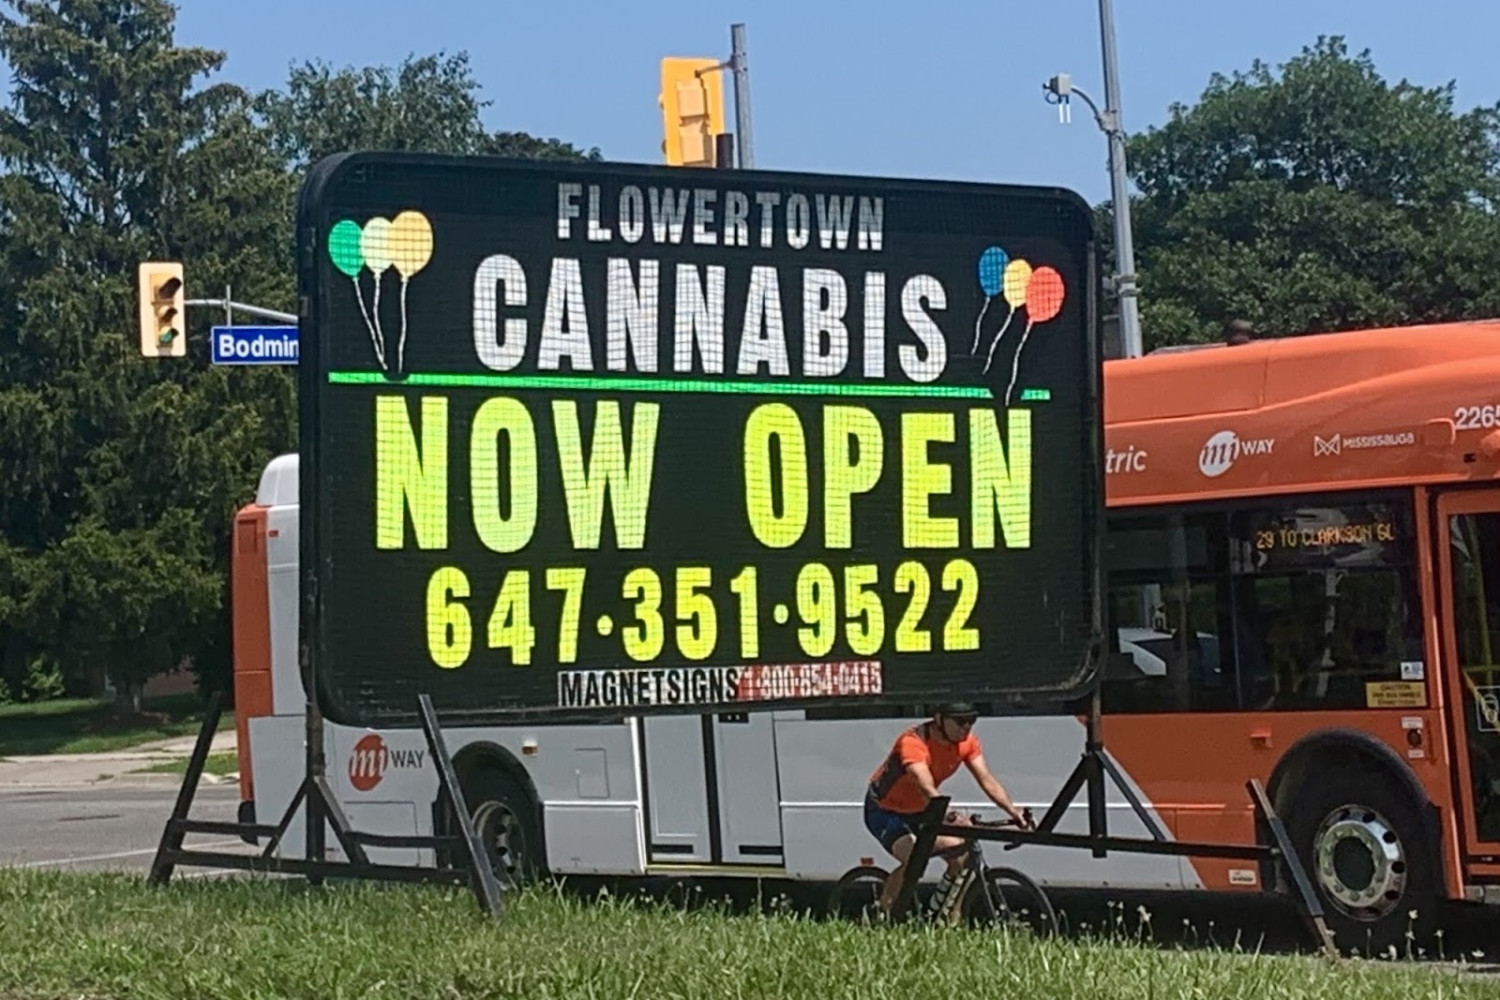 Mississauga business community welcomes jobs, revenue from legal cannabis; 4 months since City opted in illegal market lingers  